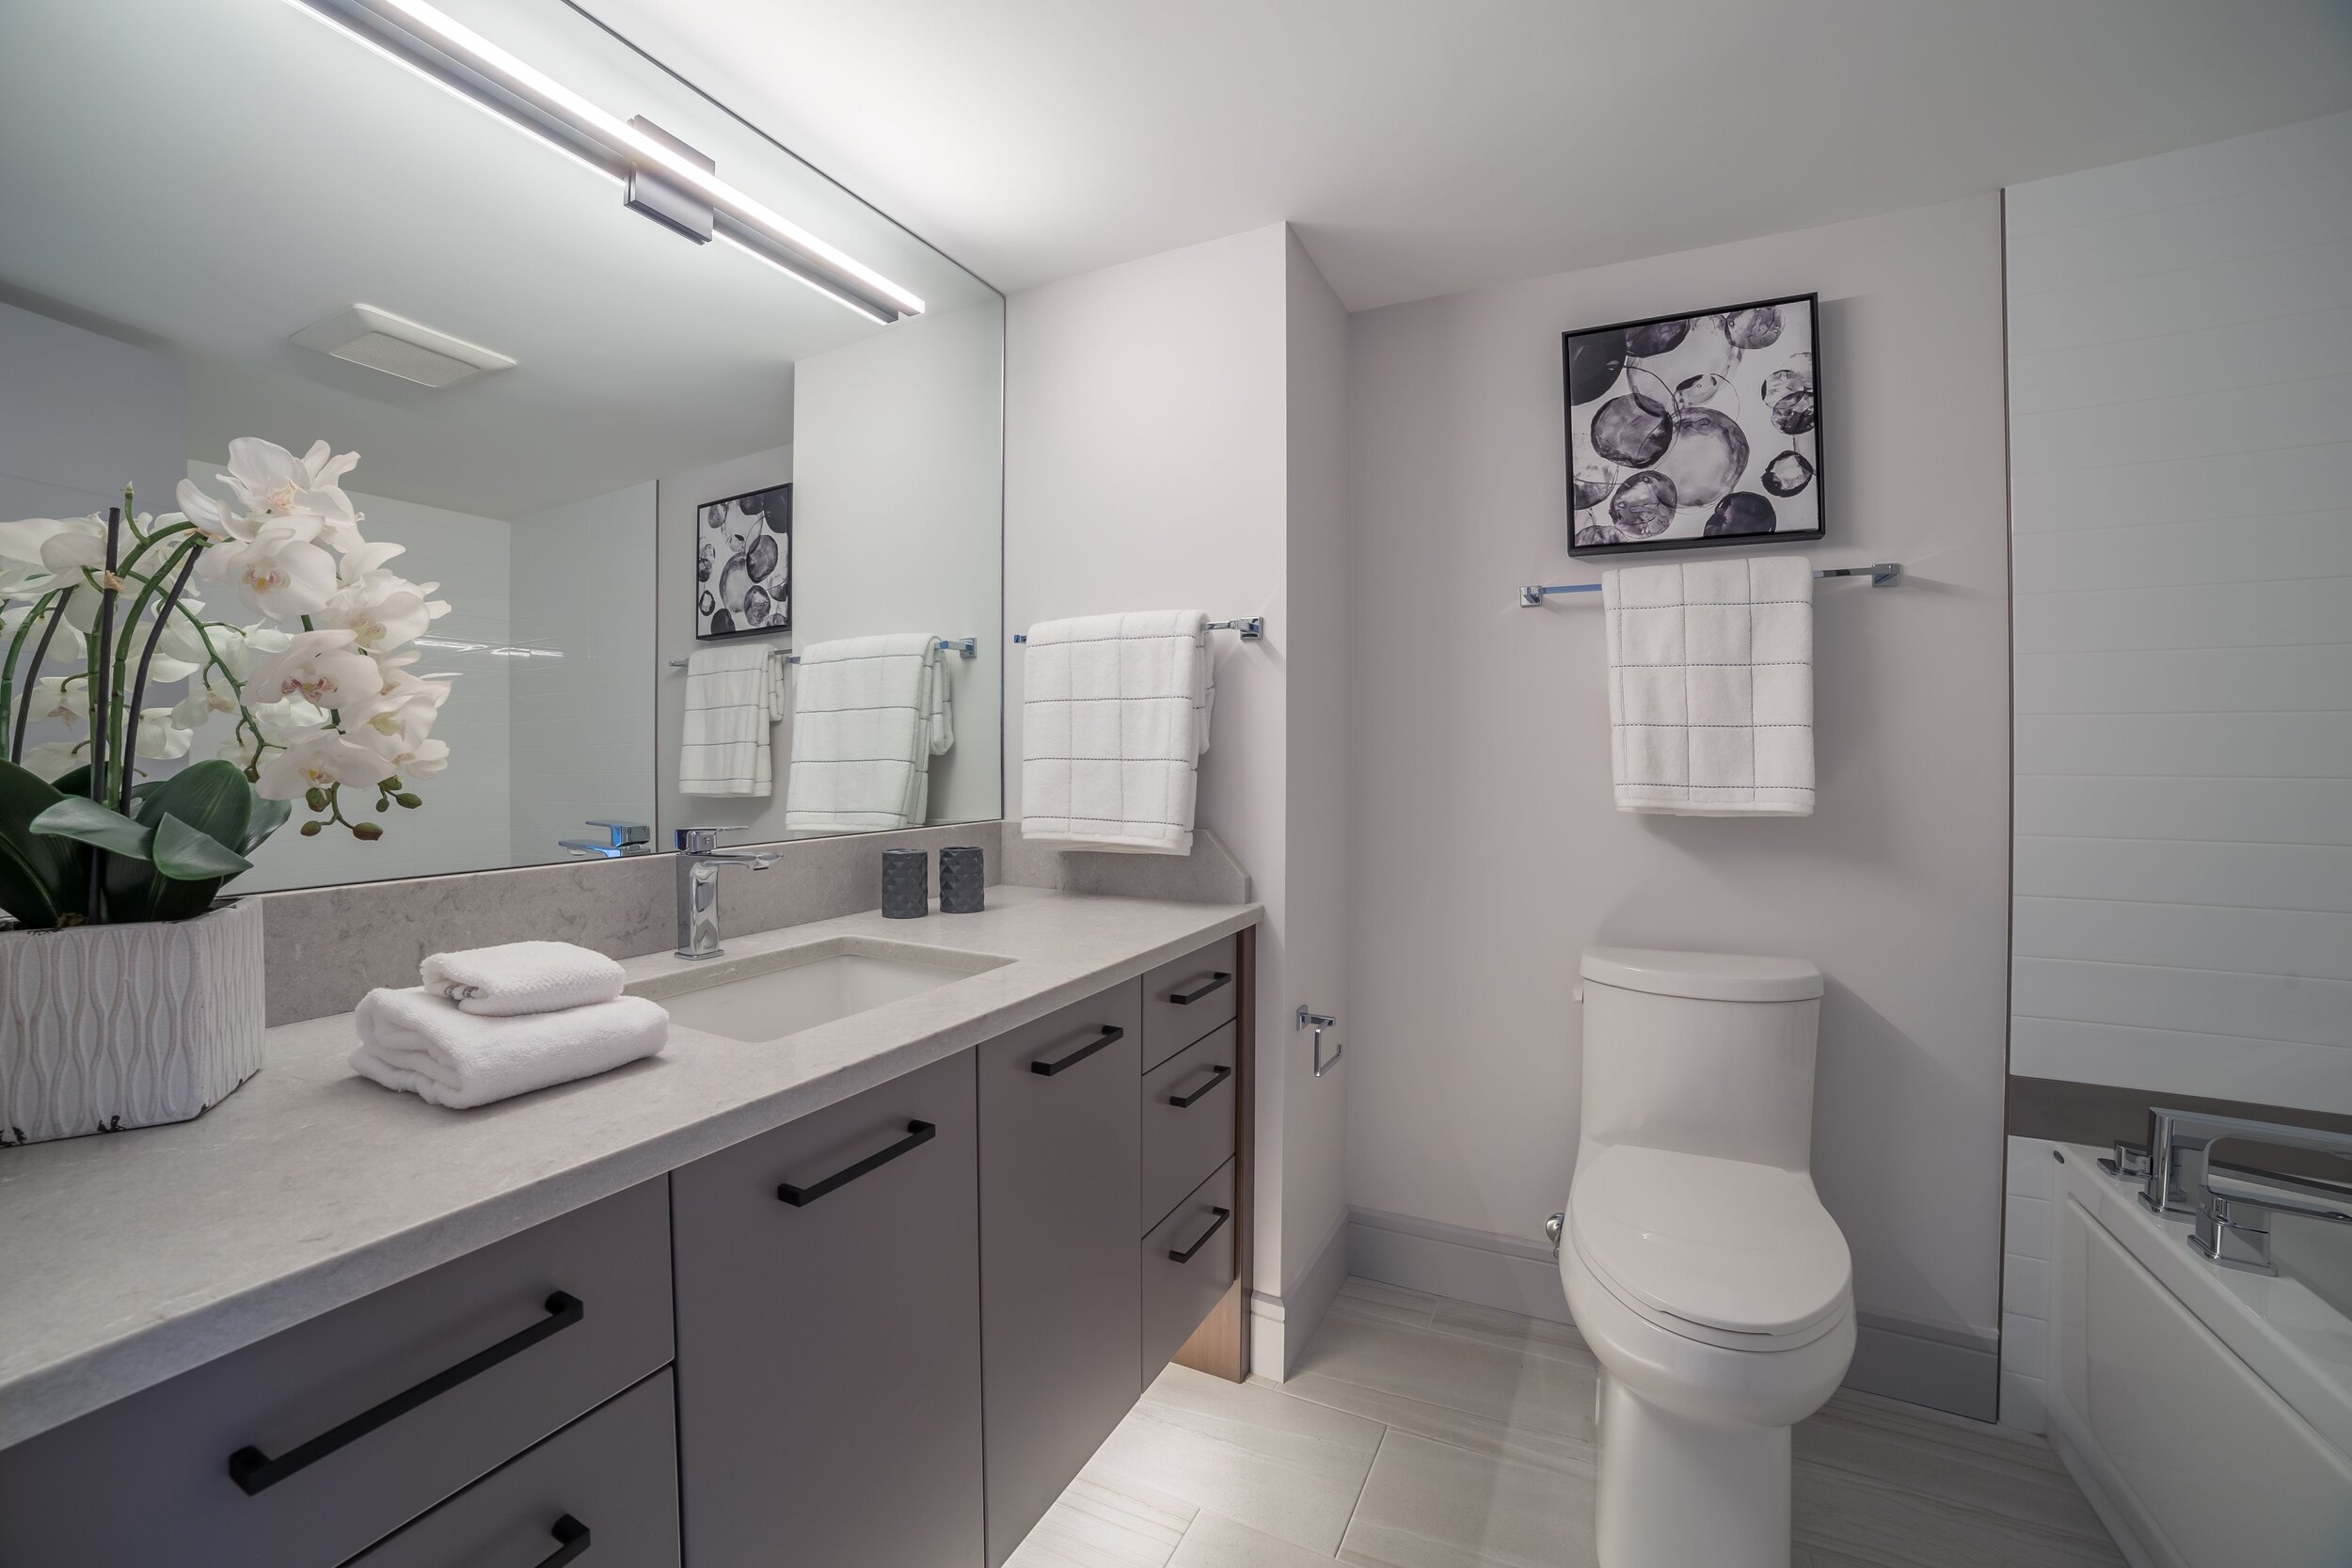 Calgary Bathroom Renovation in the community of Connaught